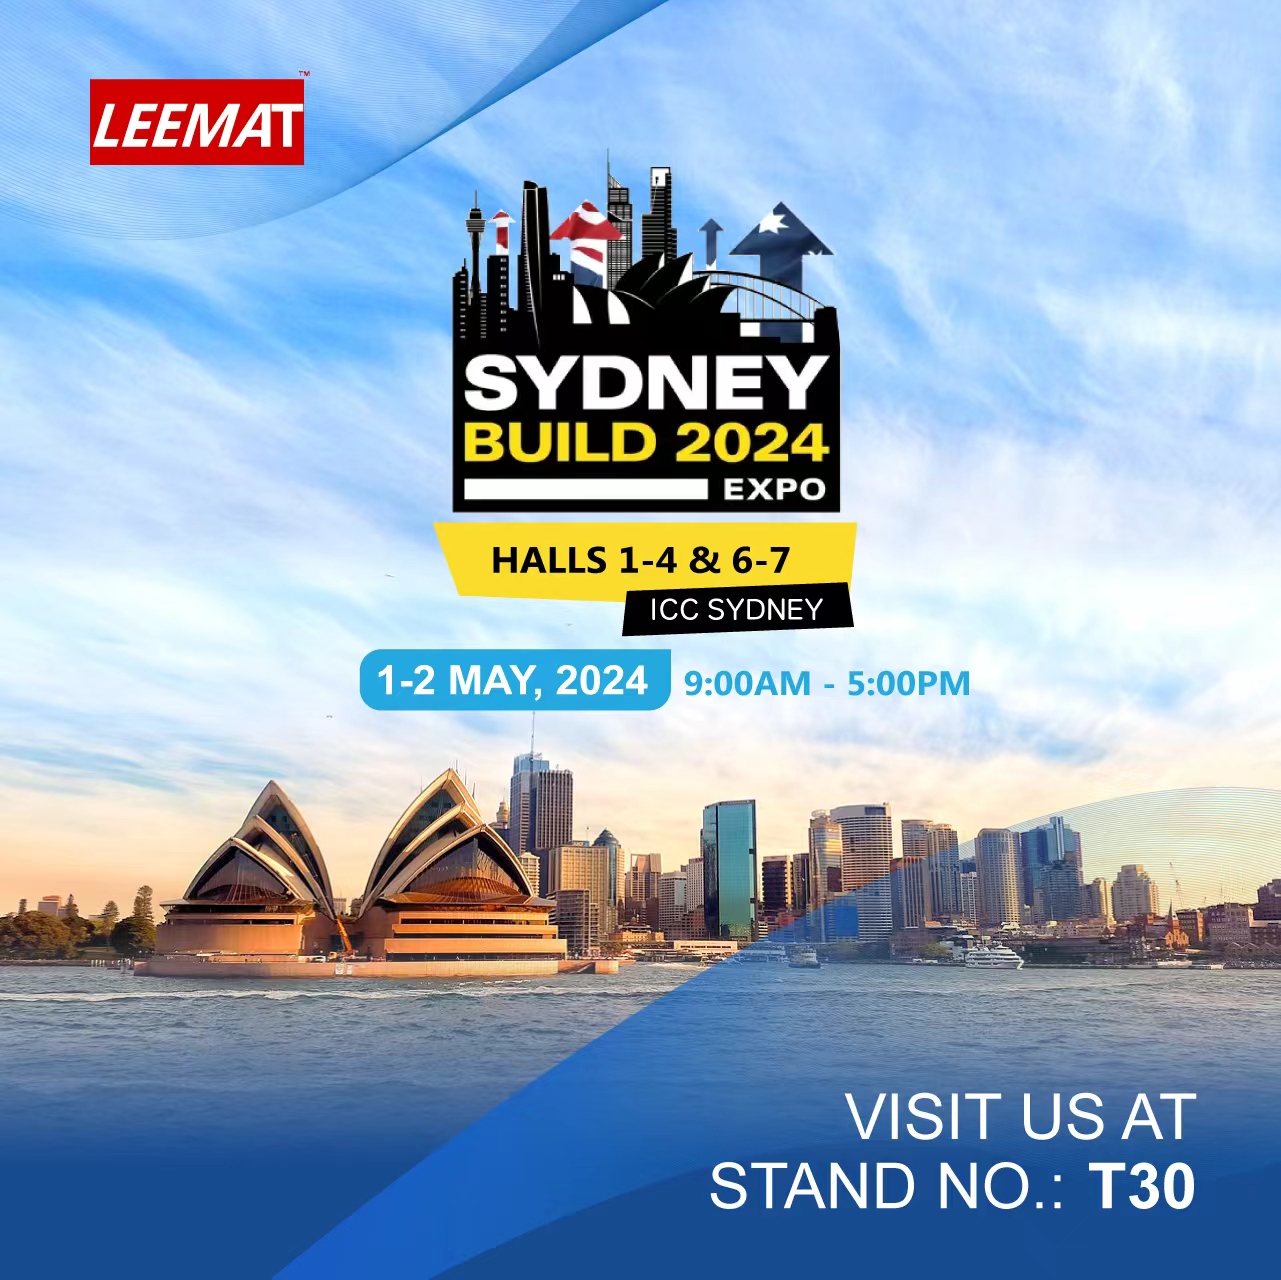 WELCOME TO VISIT OUR BOOTH NO.:T 30, SYDNEY BUILD 2024 EXPO